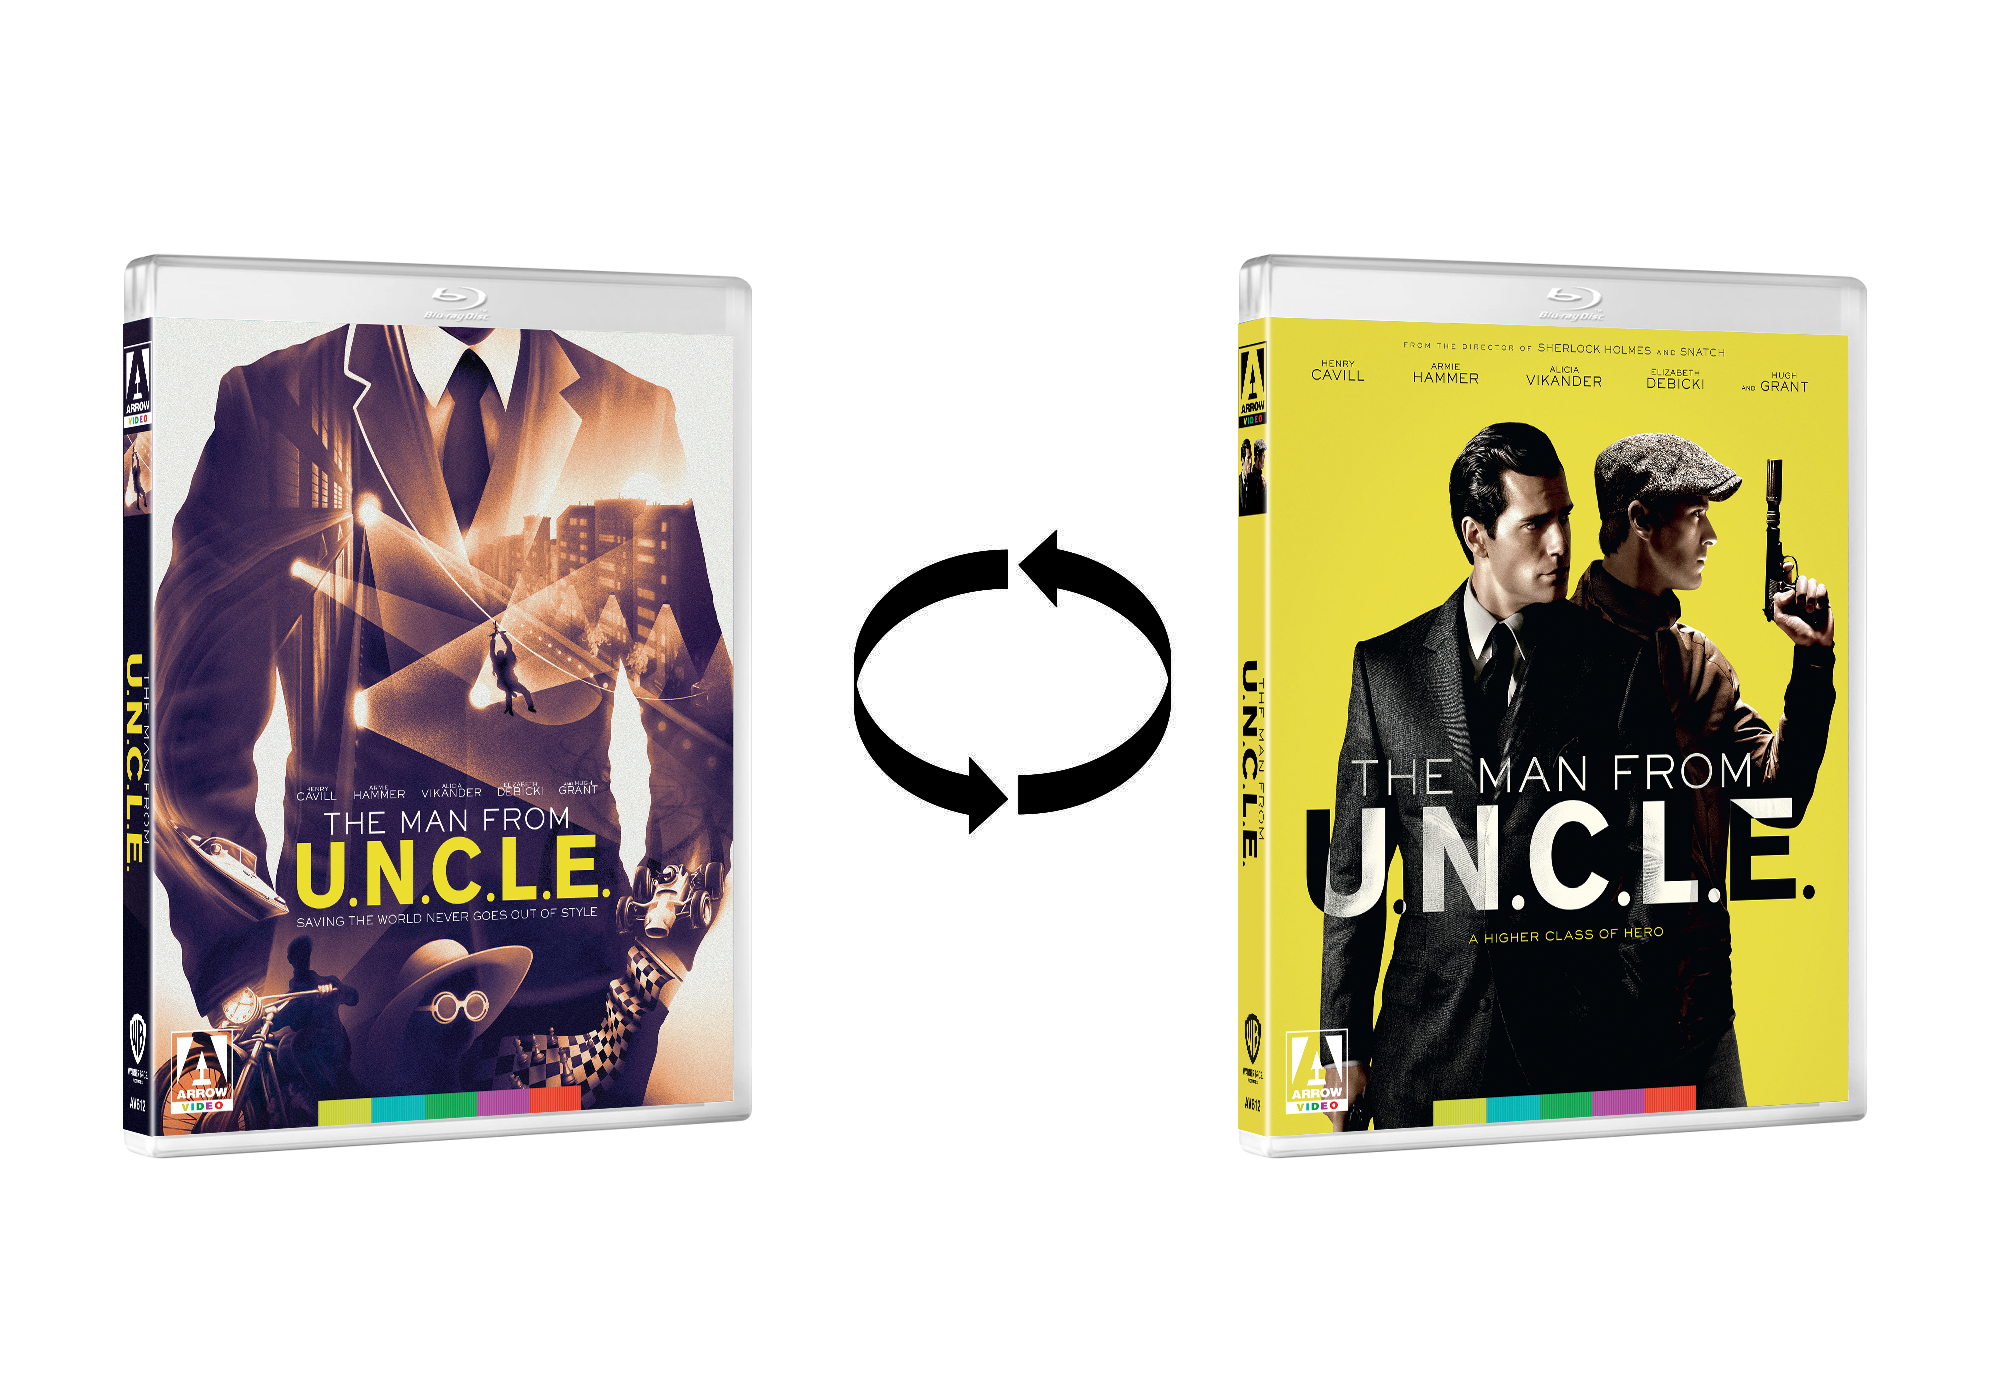 THE MAN FROM U.N.C.L.E. (LIMITED EDITION) BLU-RAY [PRE-ORDER]